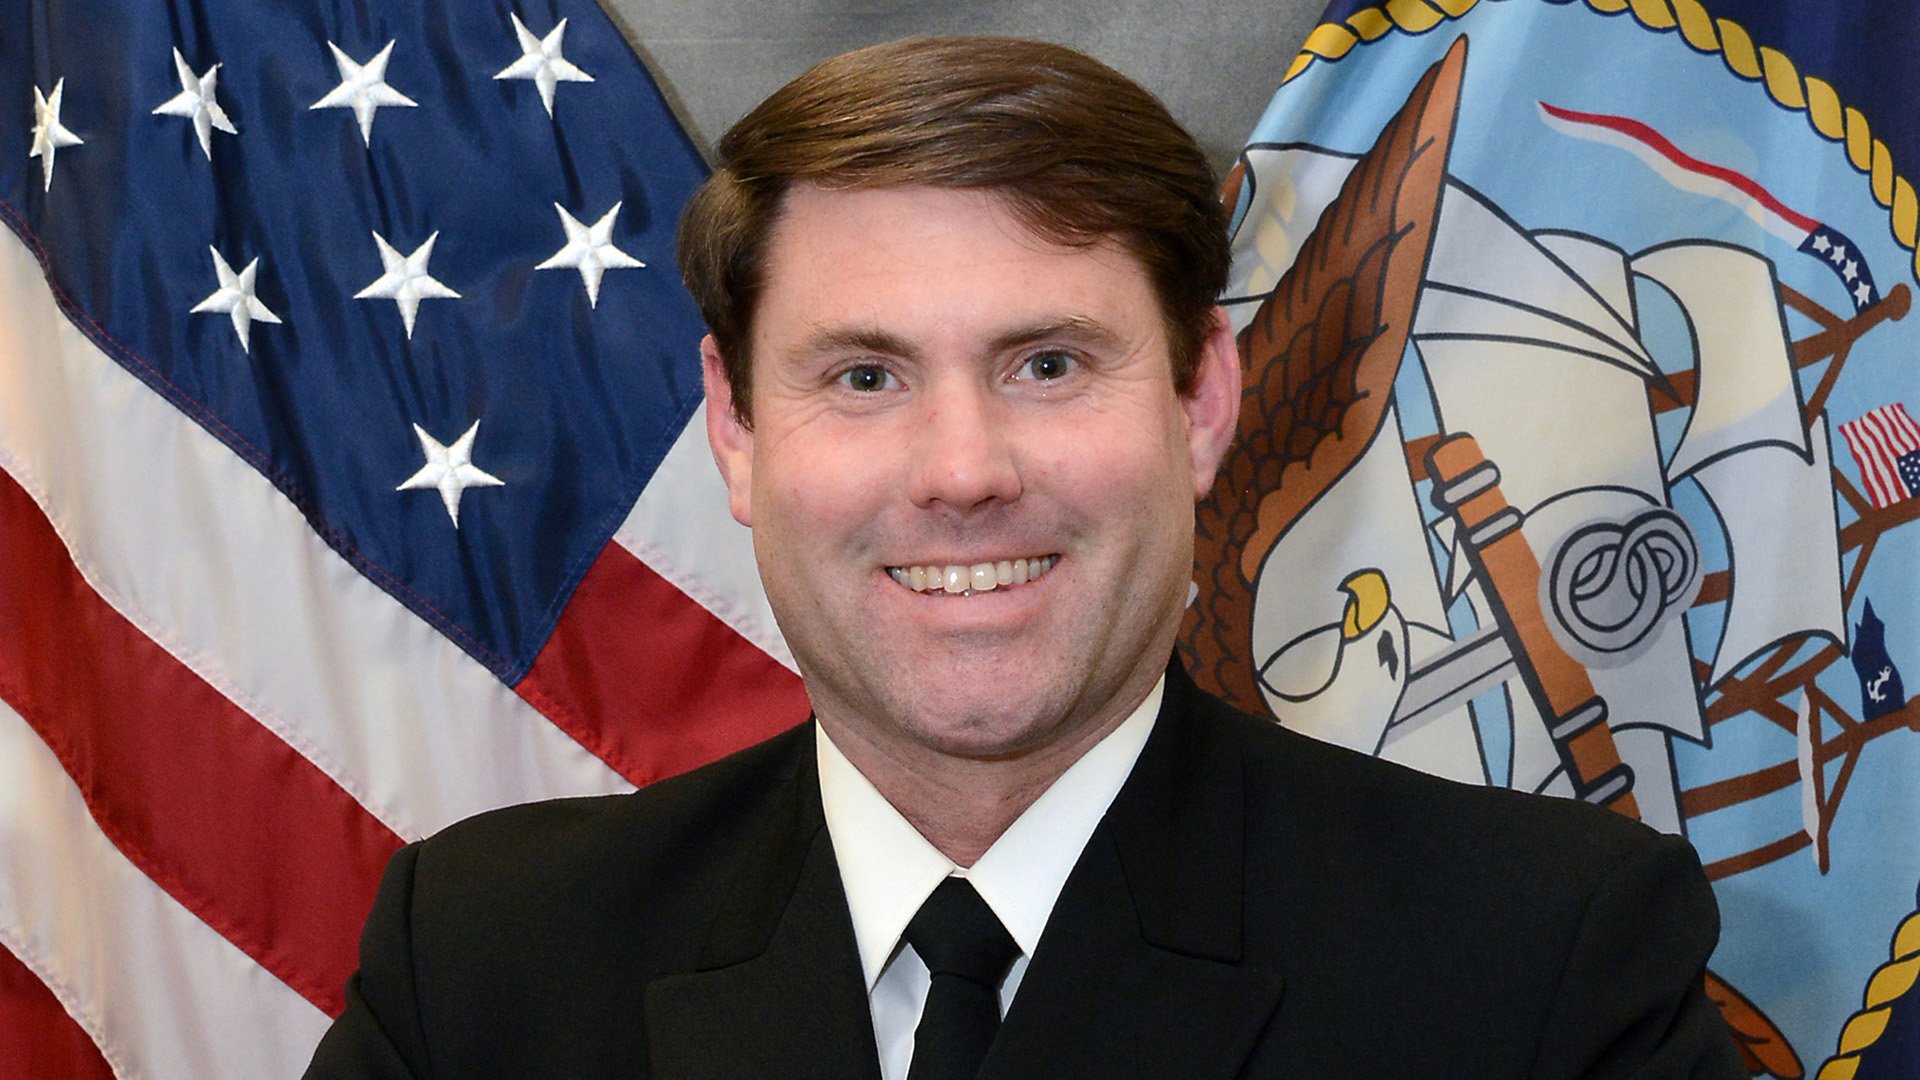 The commanding officer of Navy Talent Acquisition Group (NTAG) Ohio River Valley, Cmdr. John Mullen, was relieved by Commodore Bob Reddy, Navy Recruiting Region East, on Oct. 12, 2022, due to loss of confidence in his ability to command. US Navy photo.